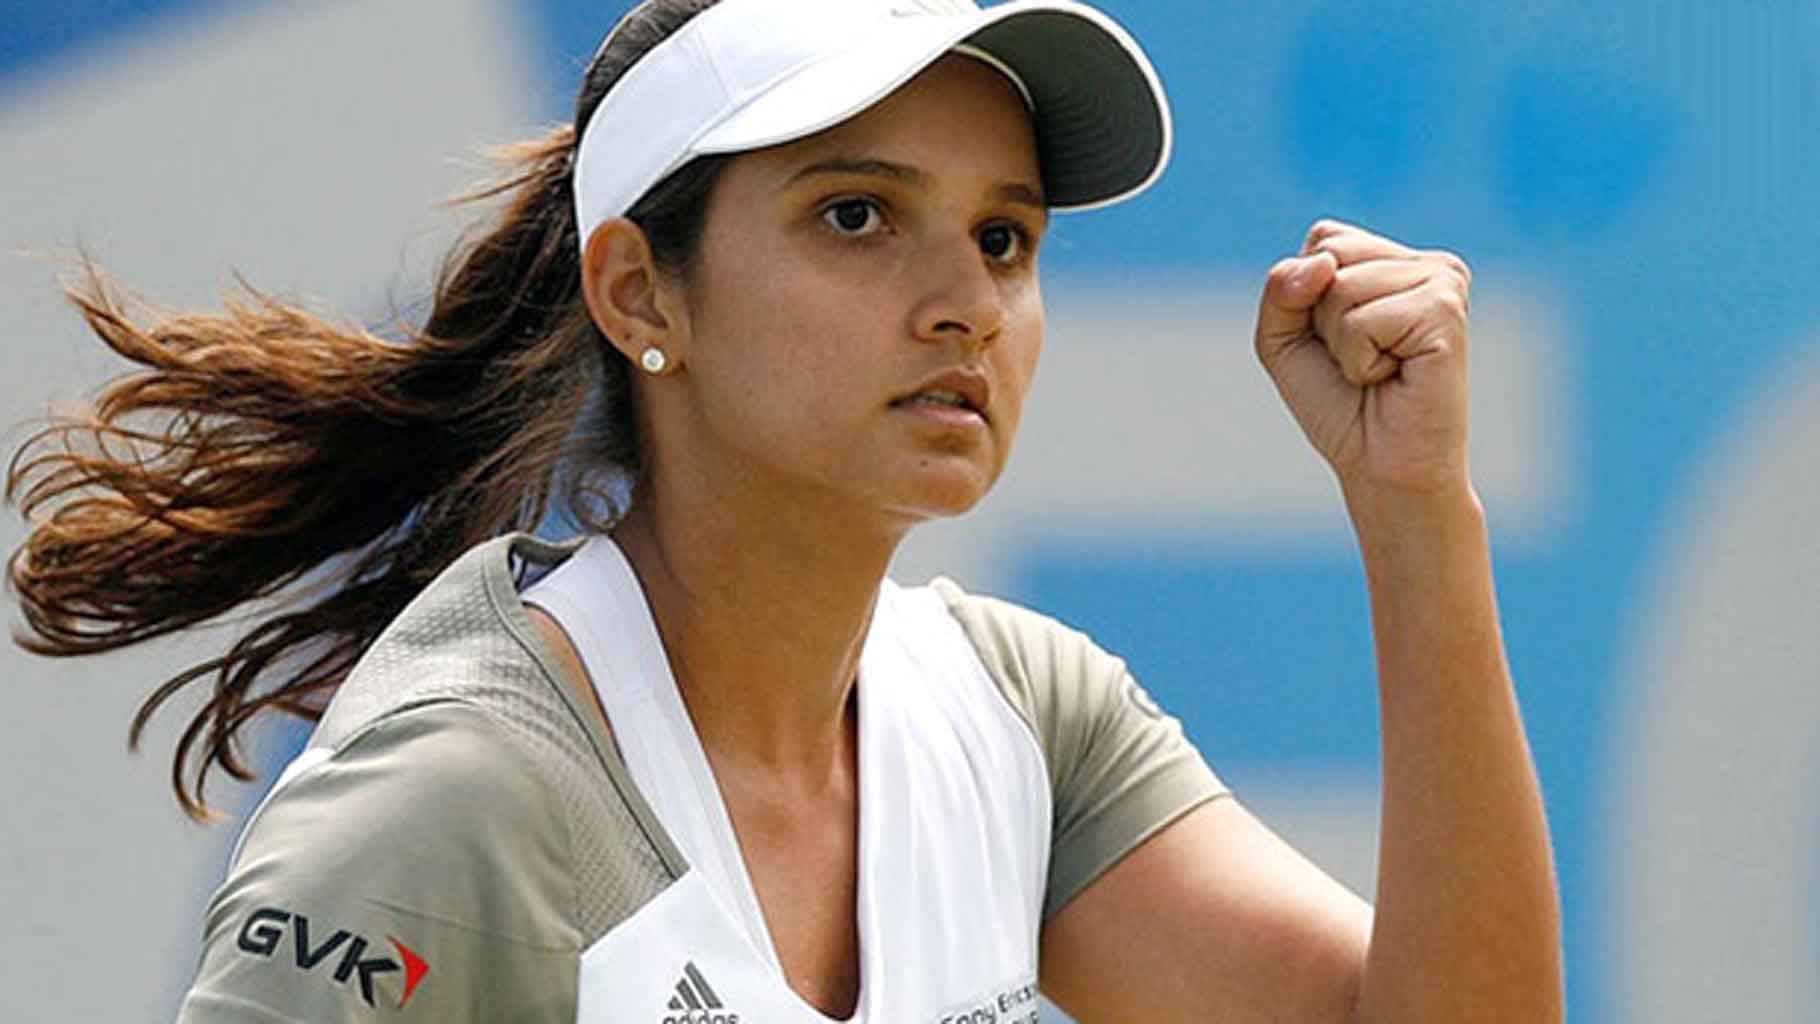 Sania Mirza Hd Wallpaper And Images